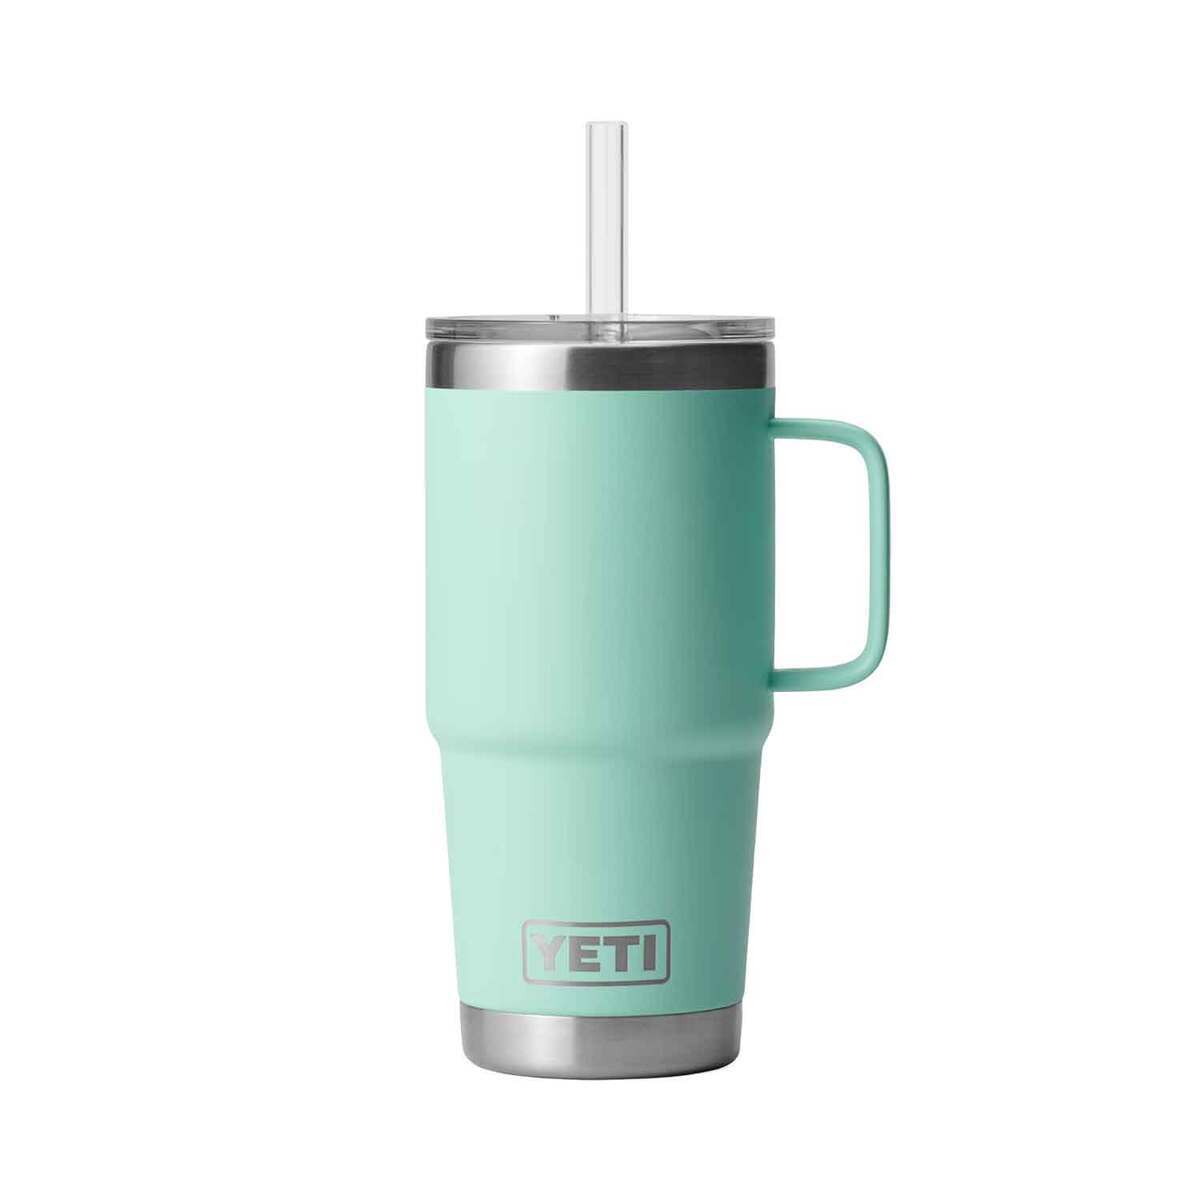 Yeti Cocktail Shaker Lid Now on Site : r/YetiCoolers